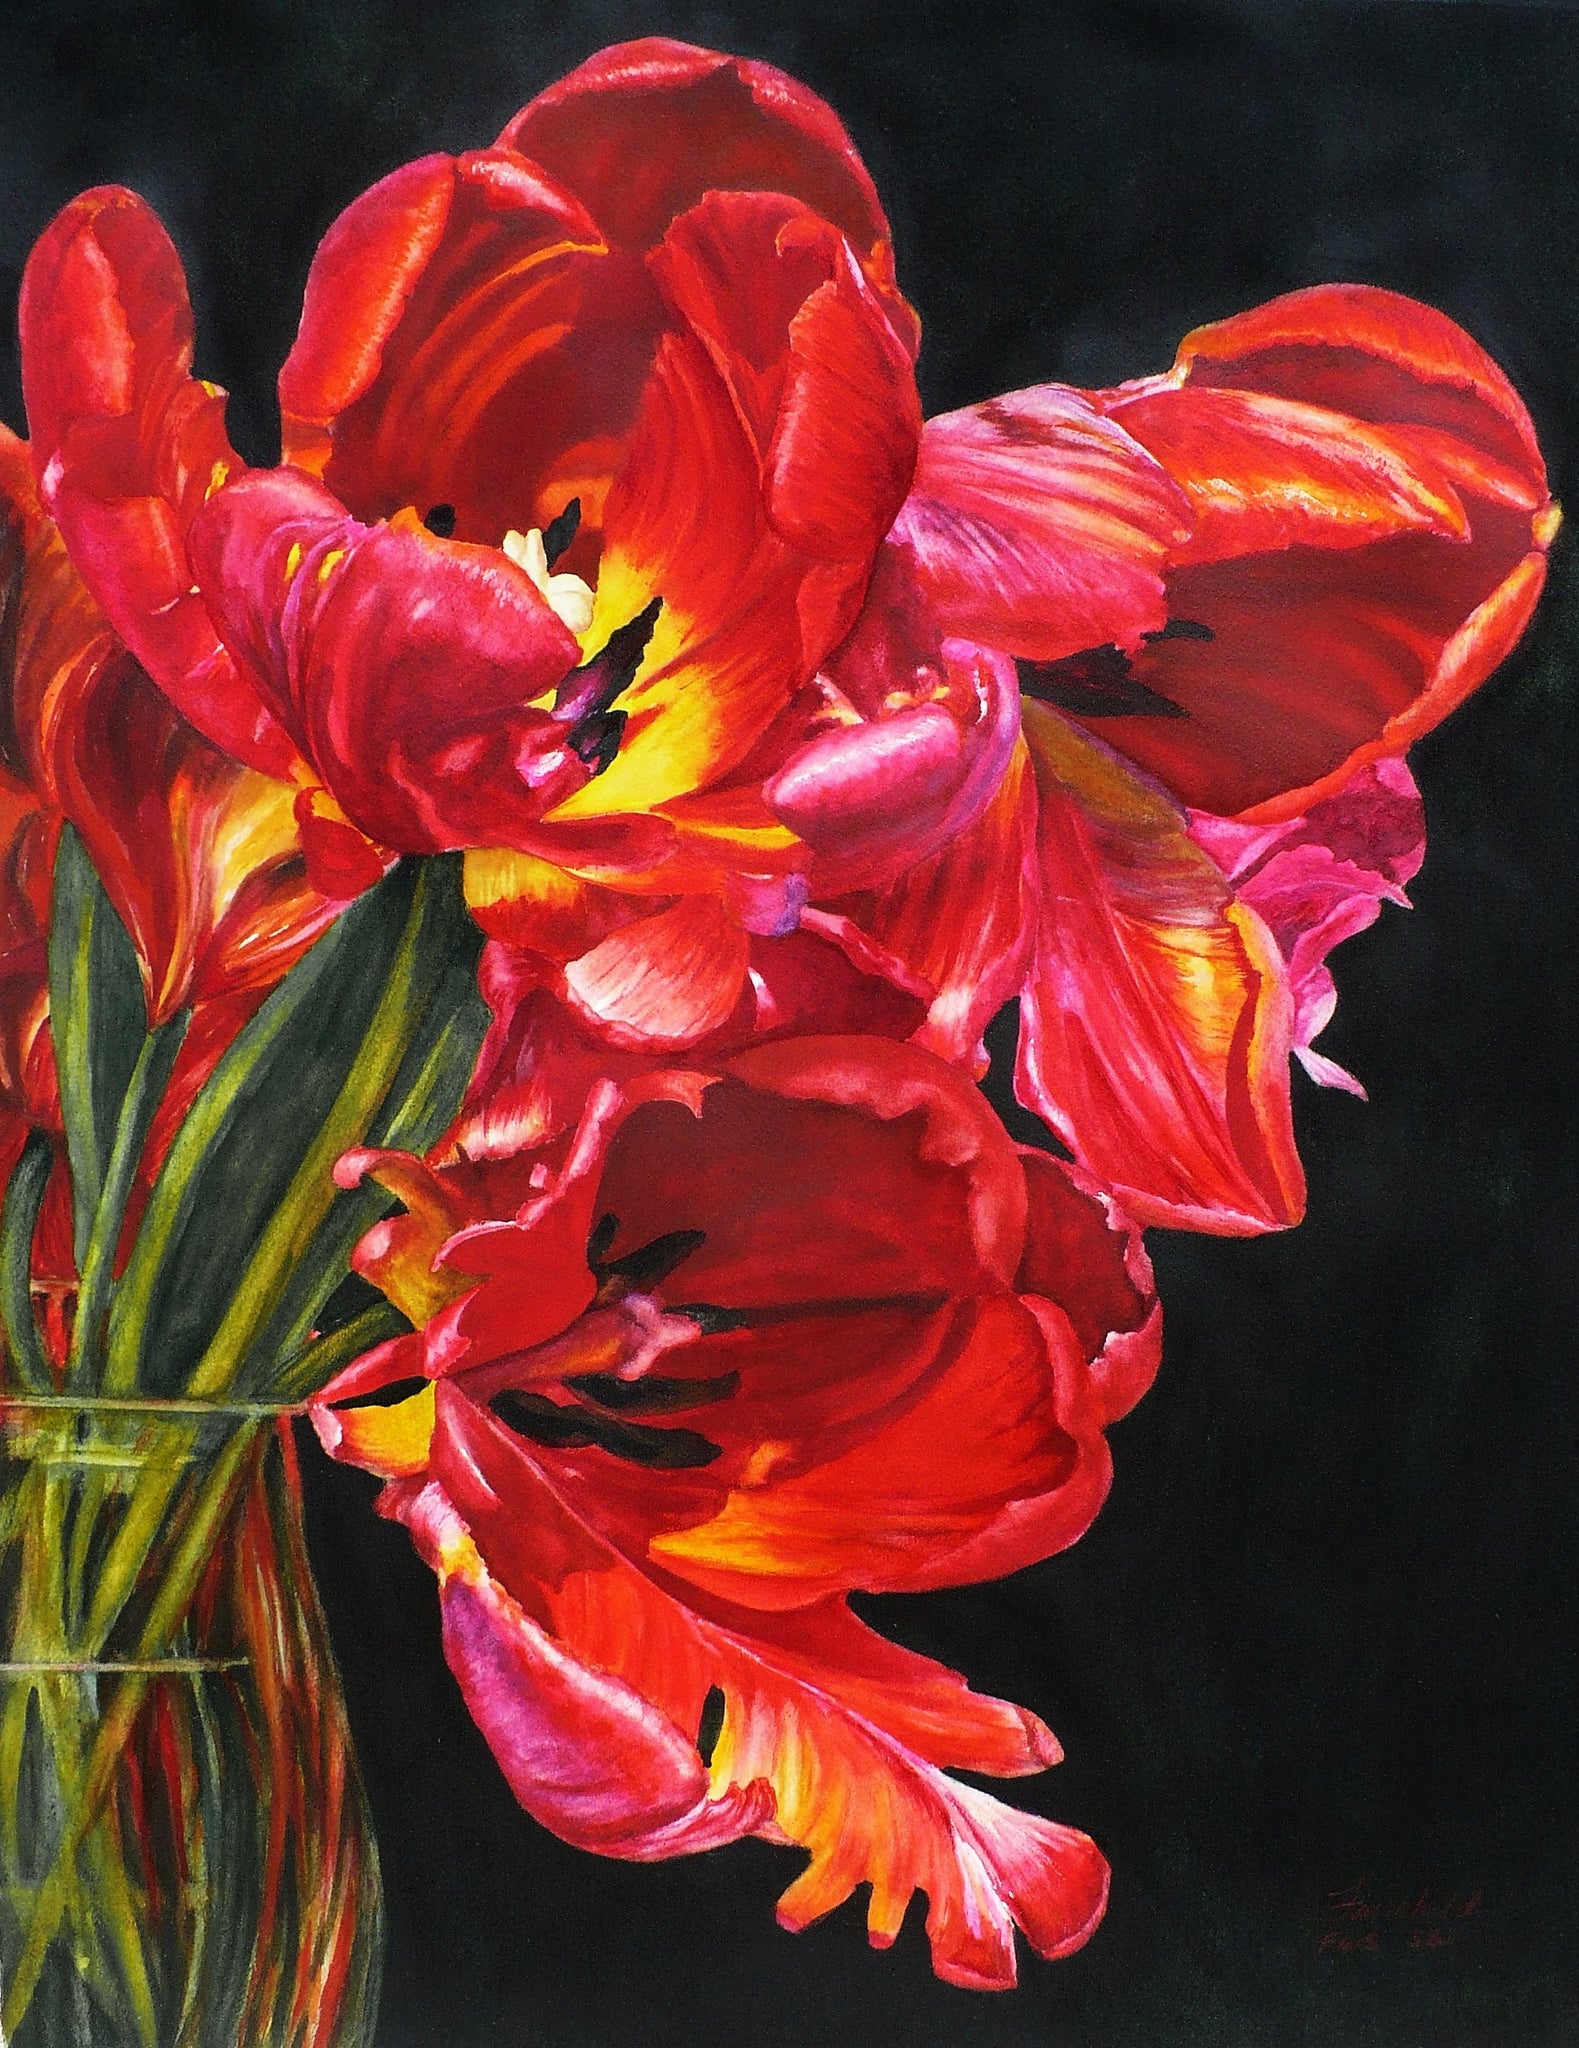 Tulips - SOLD